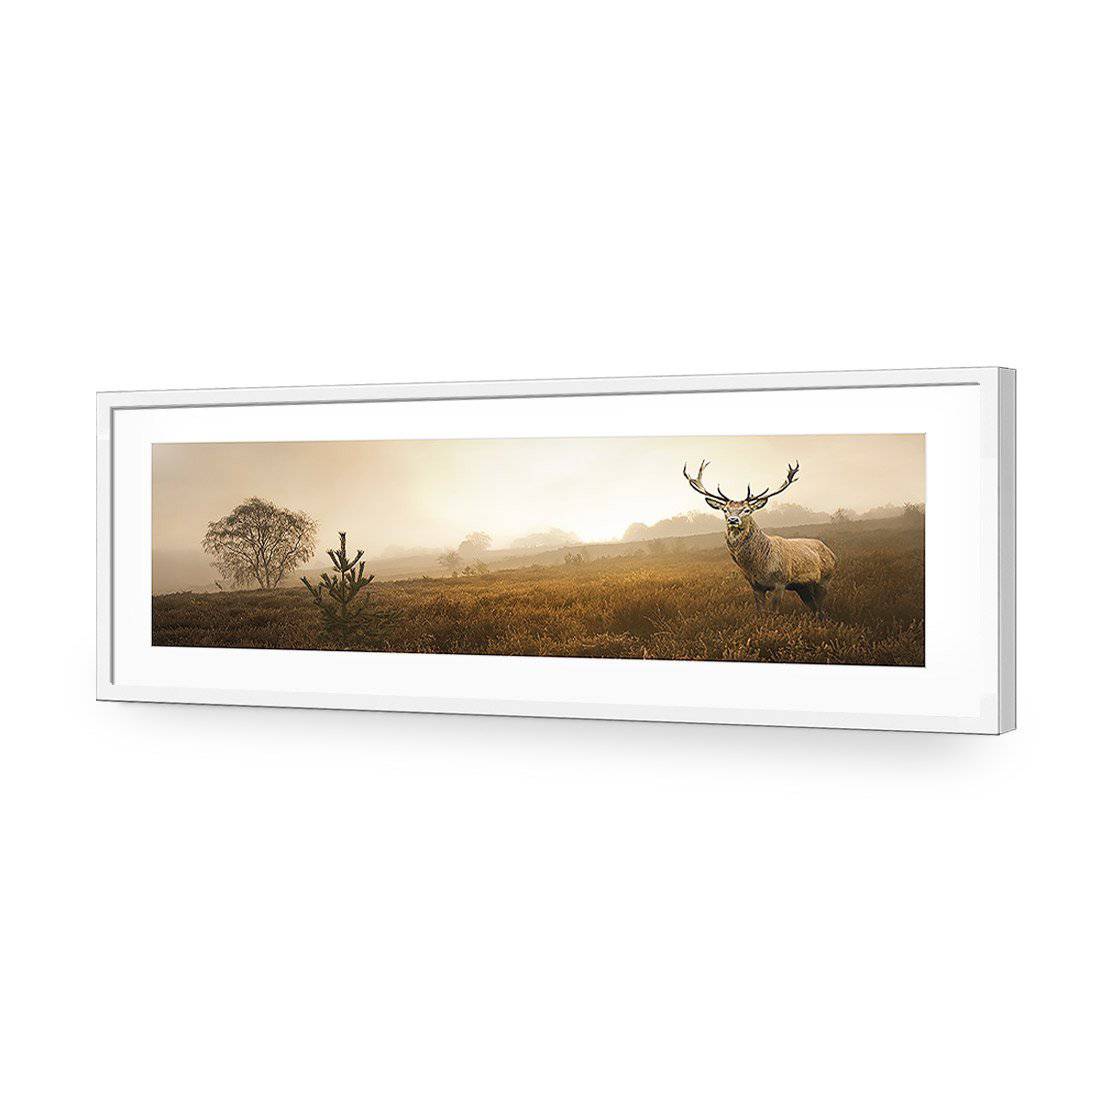 Morning Stag, Long-Acrylic-Wall Art Design-With Border-Acrylic - White Frame-60x20cm-Wall Art Designs